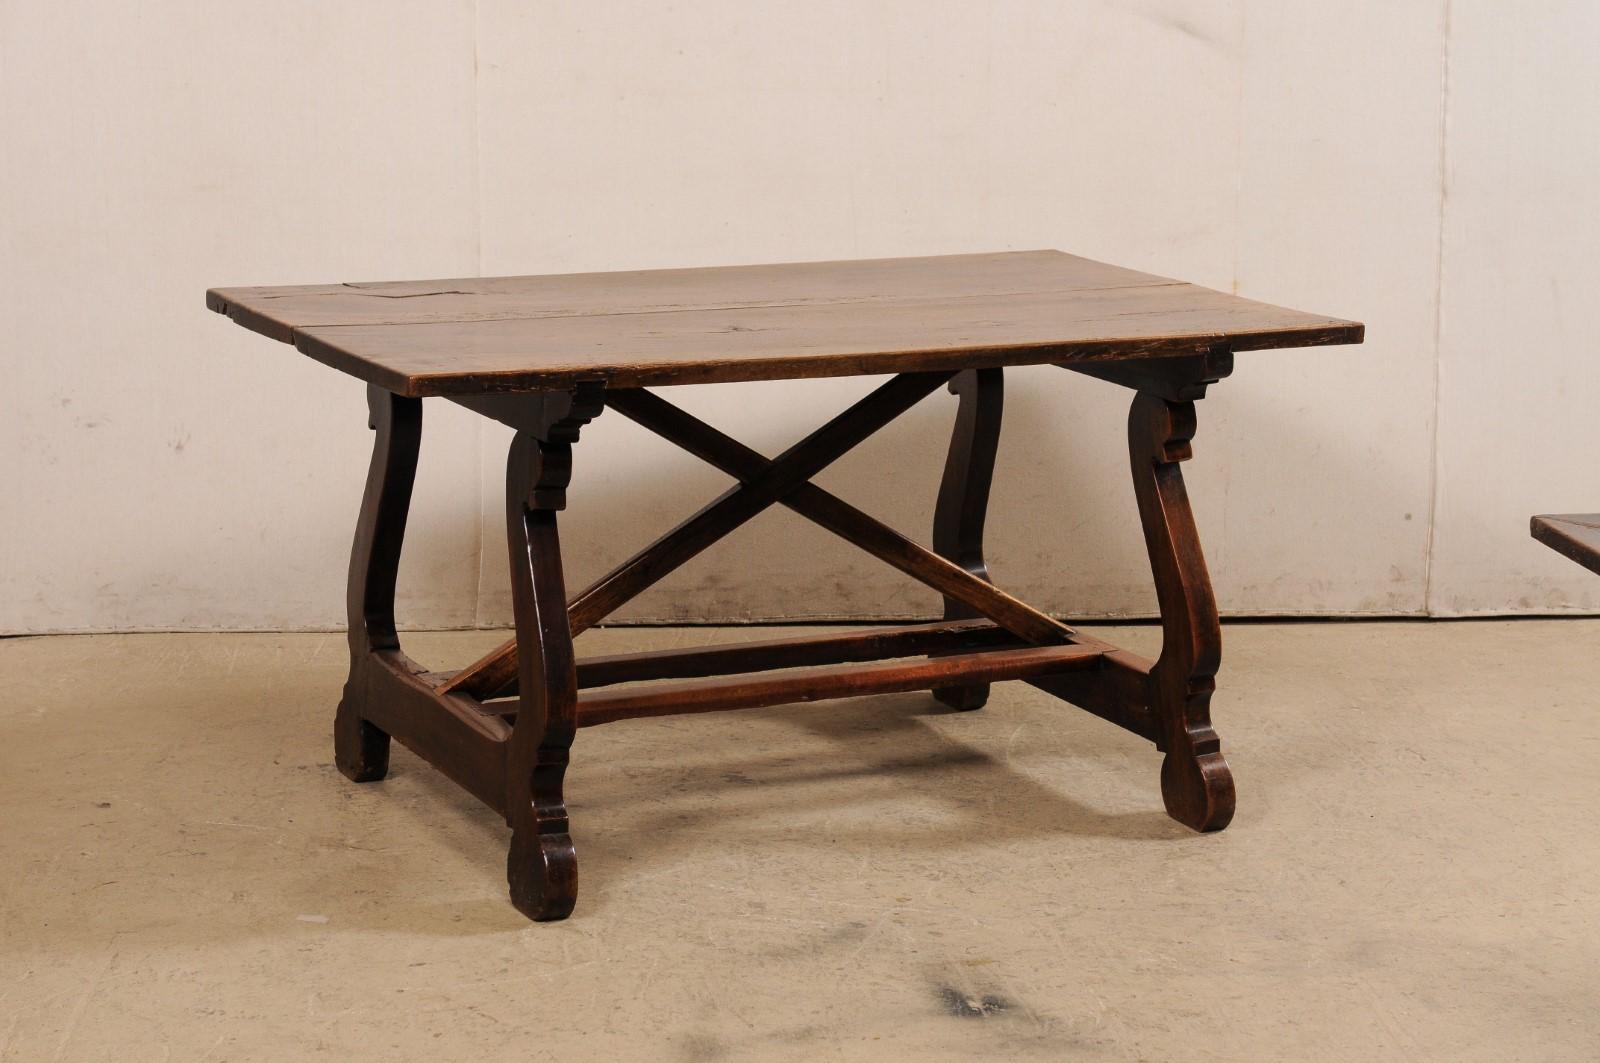 An Italian carved walnut wood table with lyre legs from the 18th century. This antique table from Italy features a rectangular-shaped top which is raised upon a pair of sinuously carved lyre inspired trestle-style legs. The legs are braced beneath